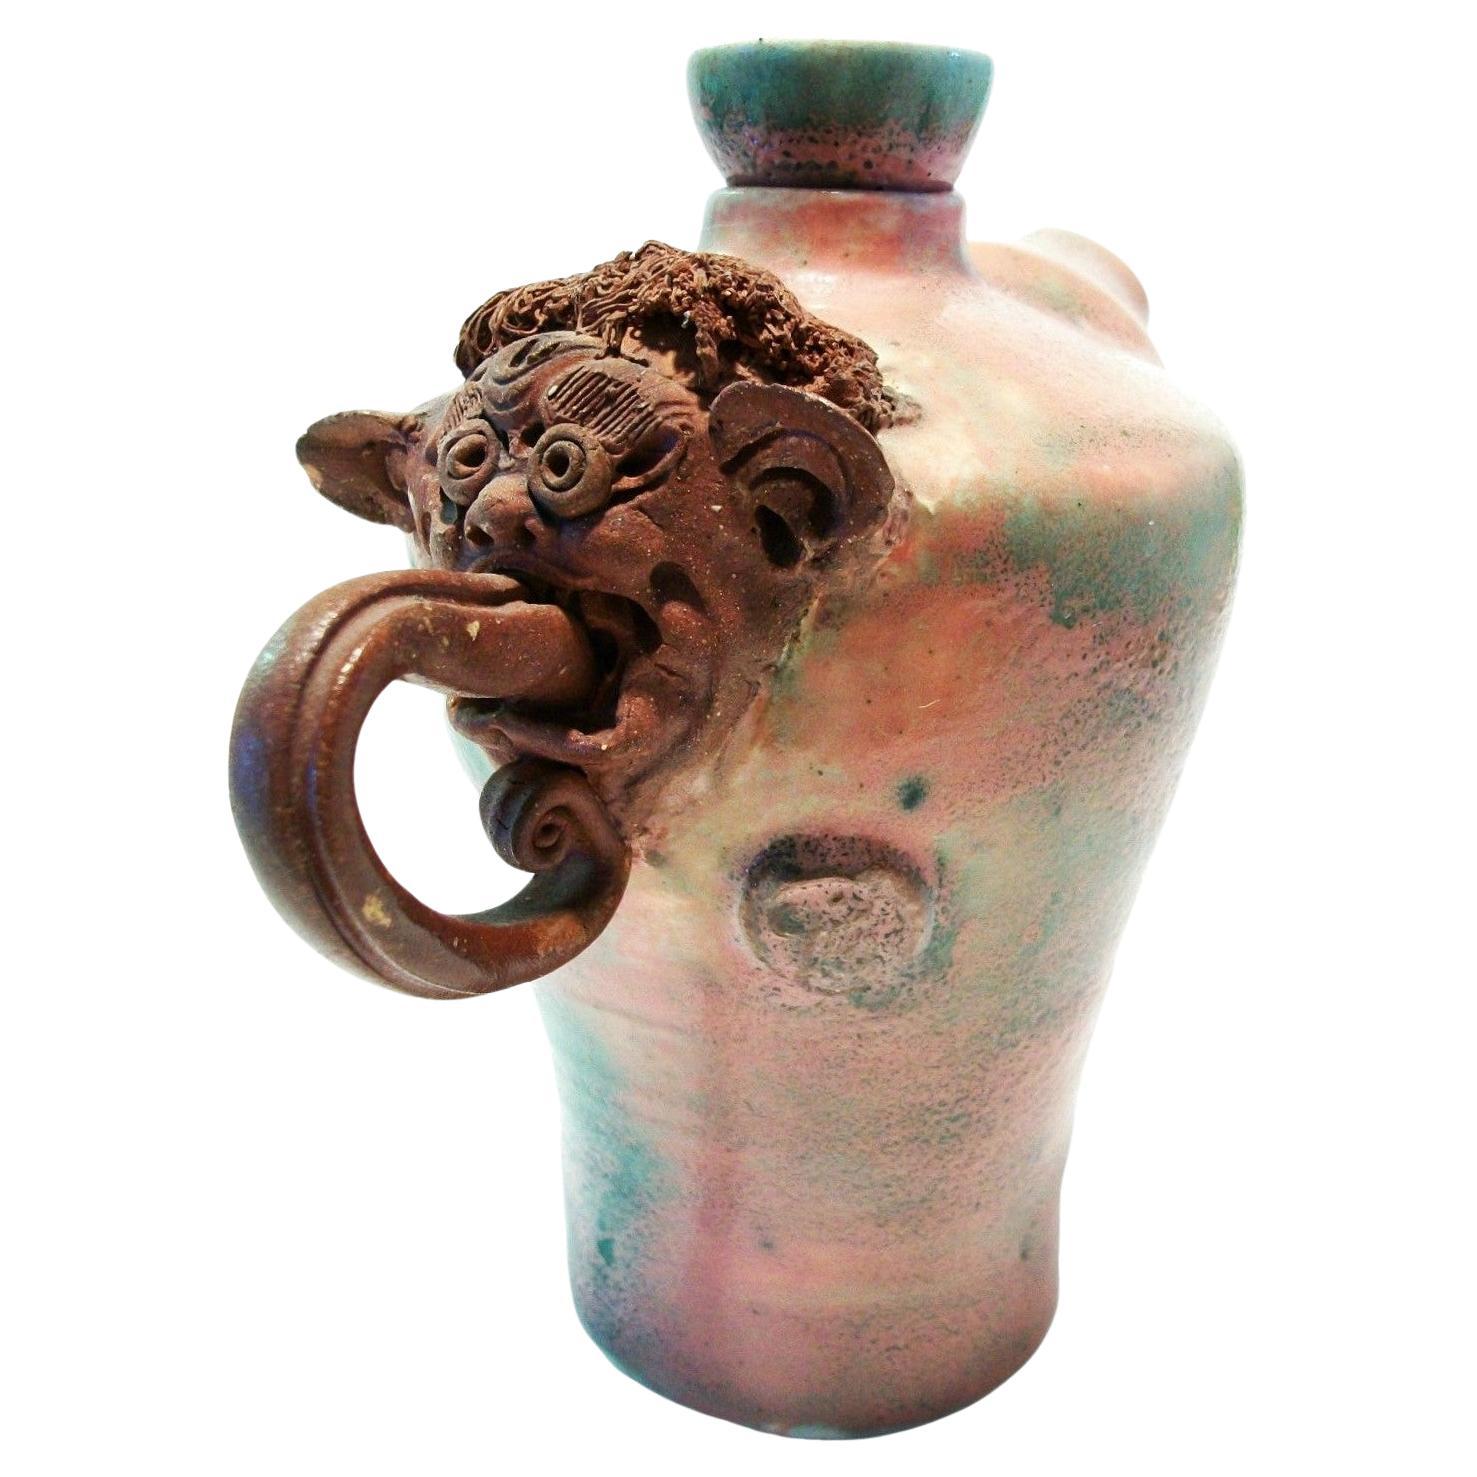 Vintage Studio Pottery Teapot with Gargoyle Handle - Signed - Mid 20th Century For Sale